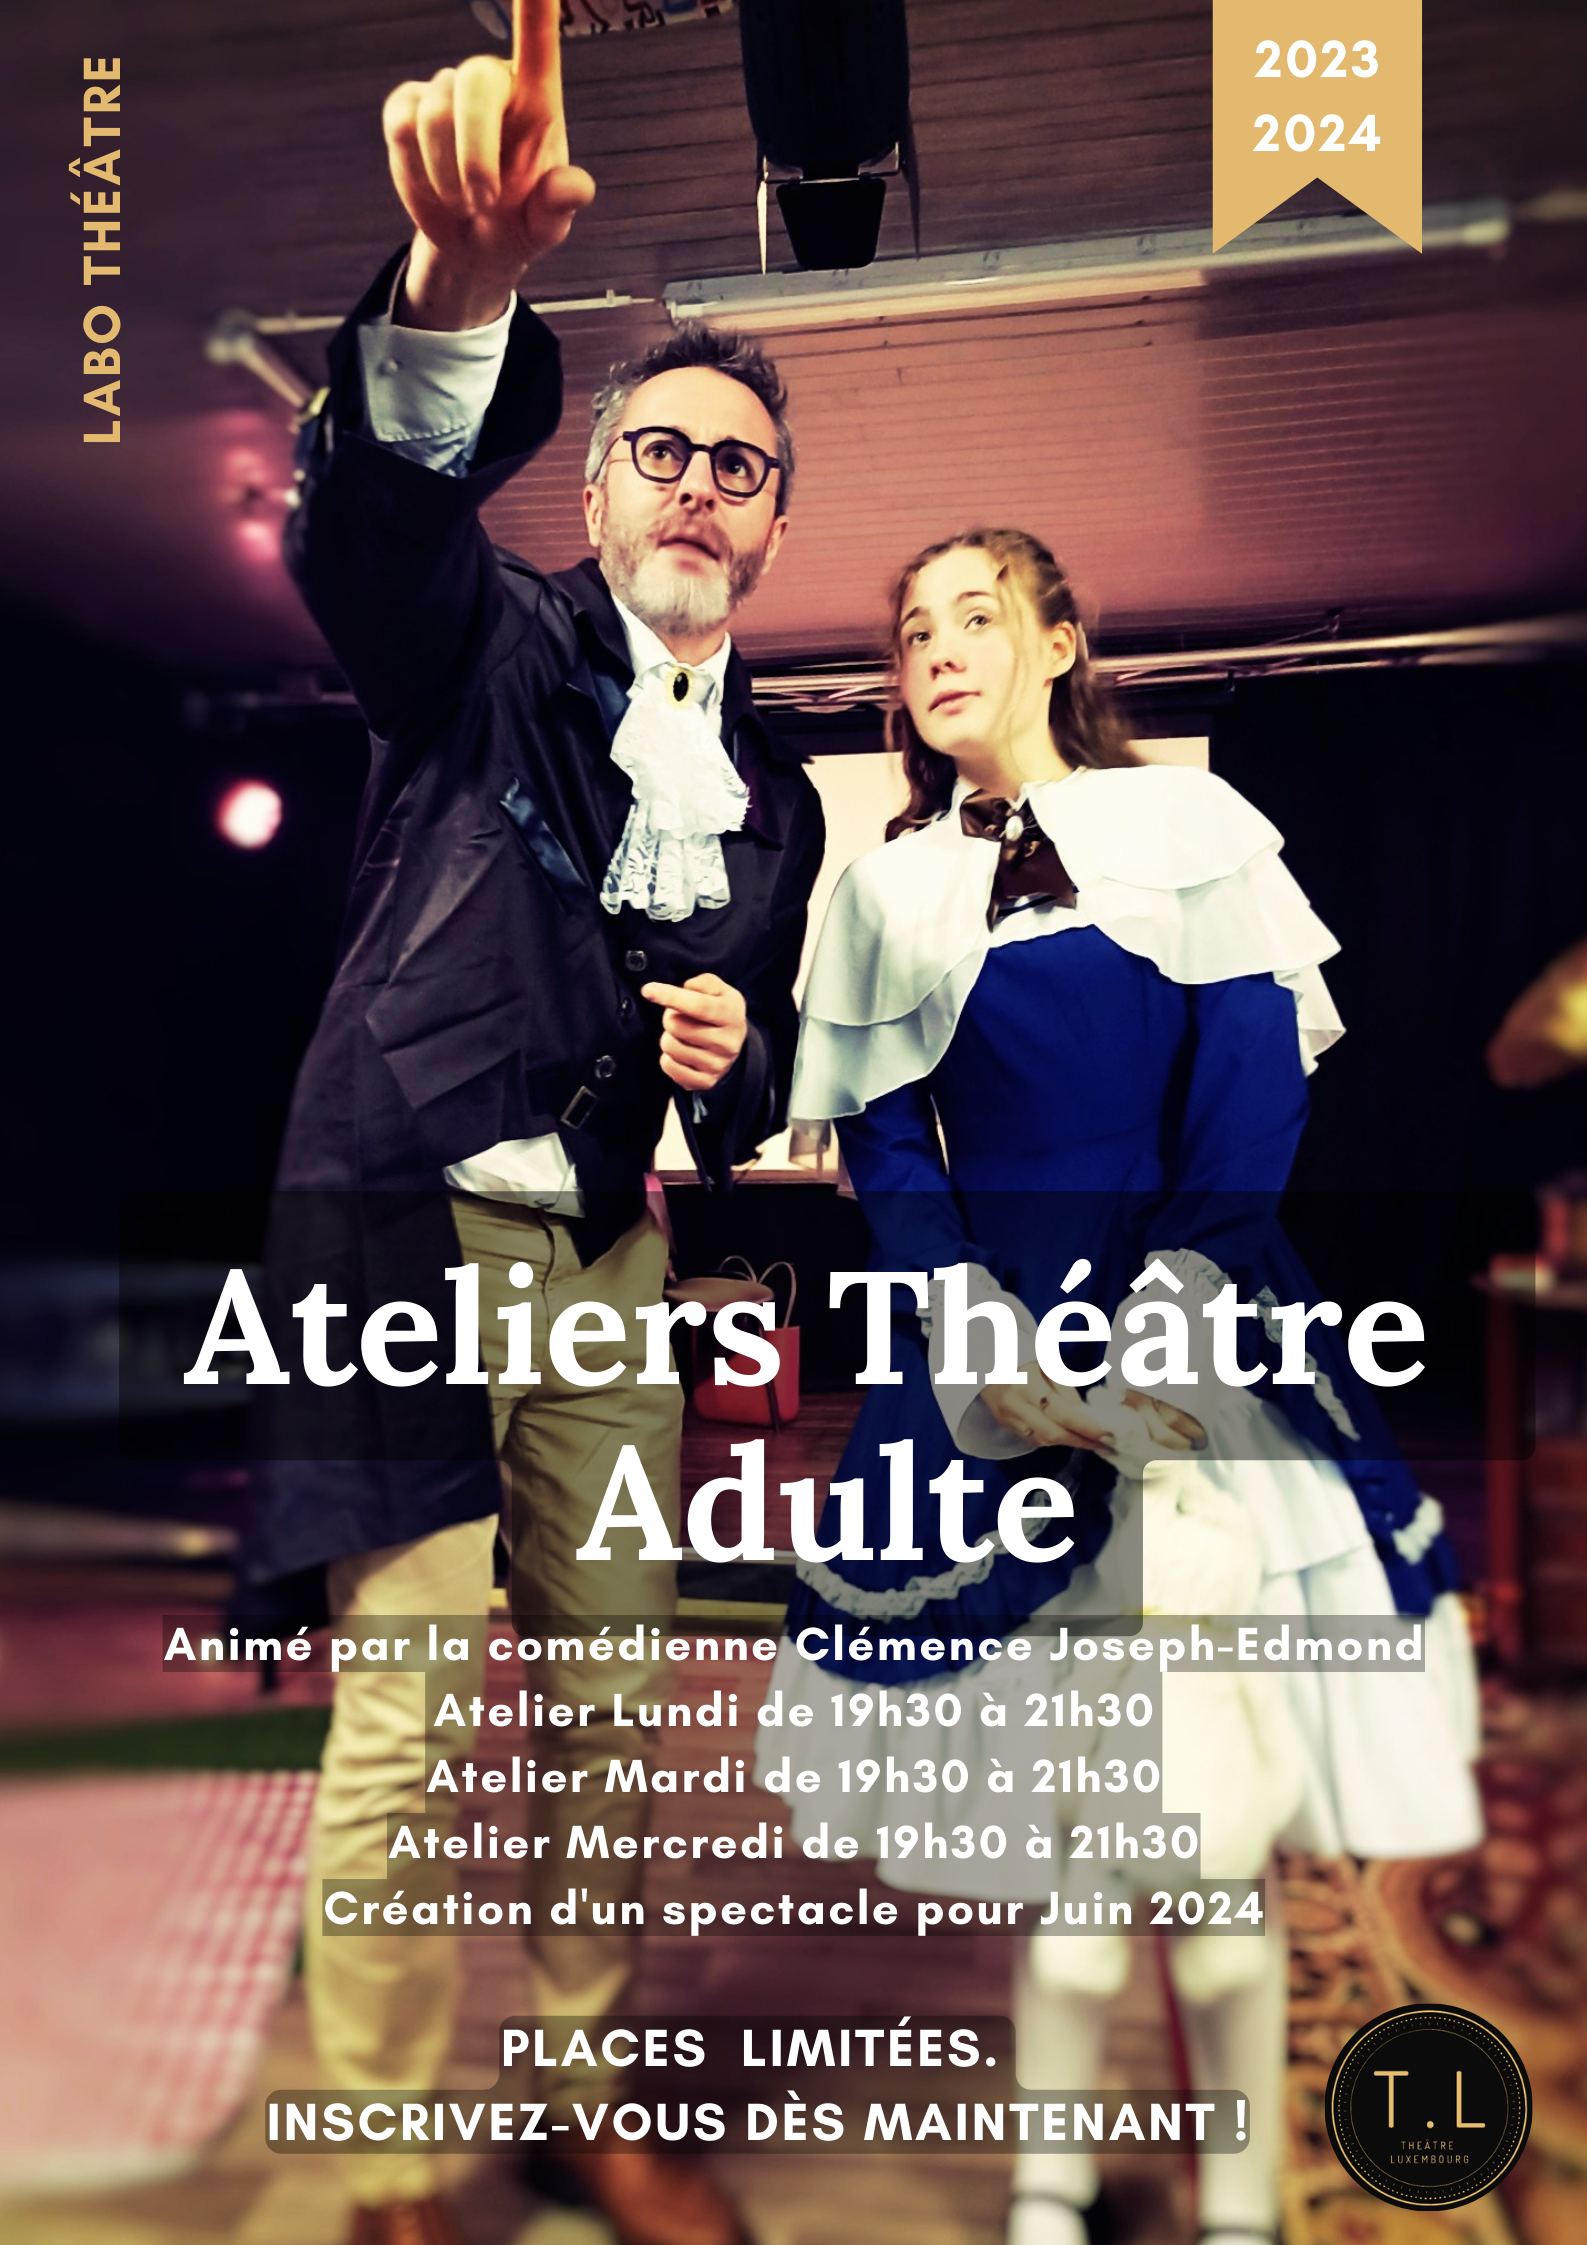 Adult Theater Workshops